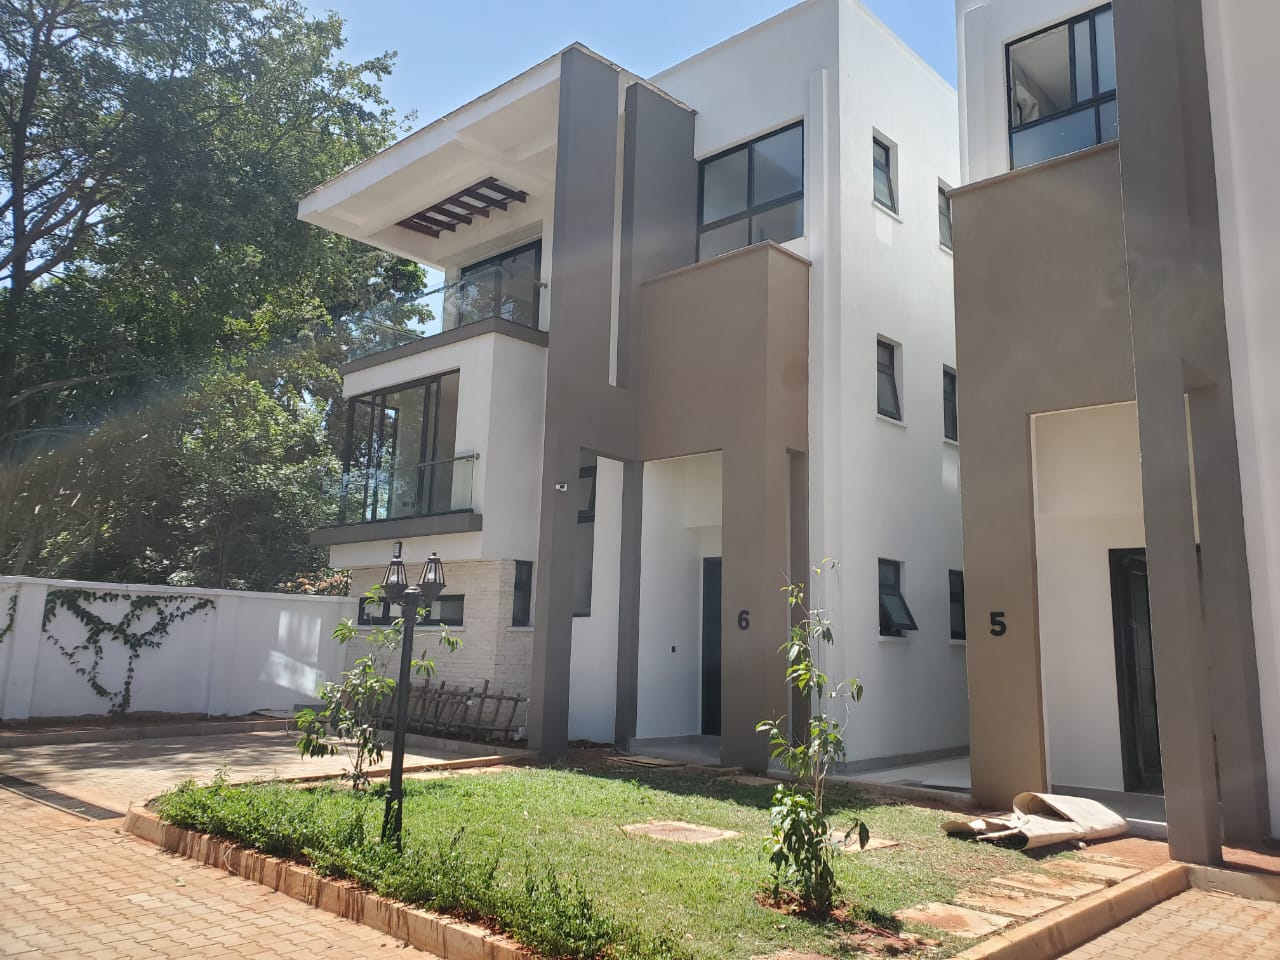 4 Bedroom Townhouses for Sale in Lavington just off James Gichuru in a gated community of 8 homes impeccably built over a 0.97 acre (4)